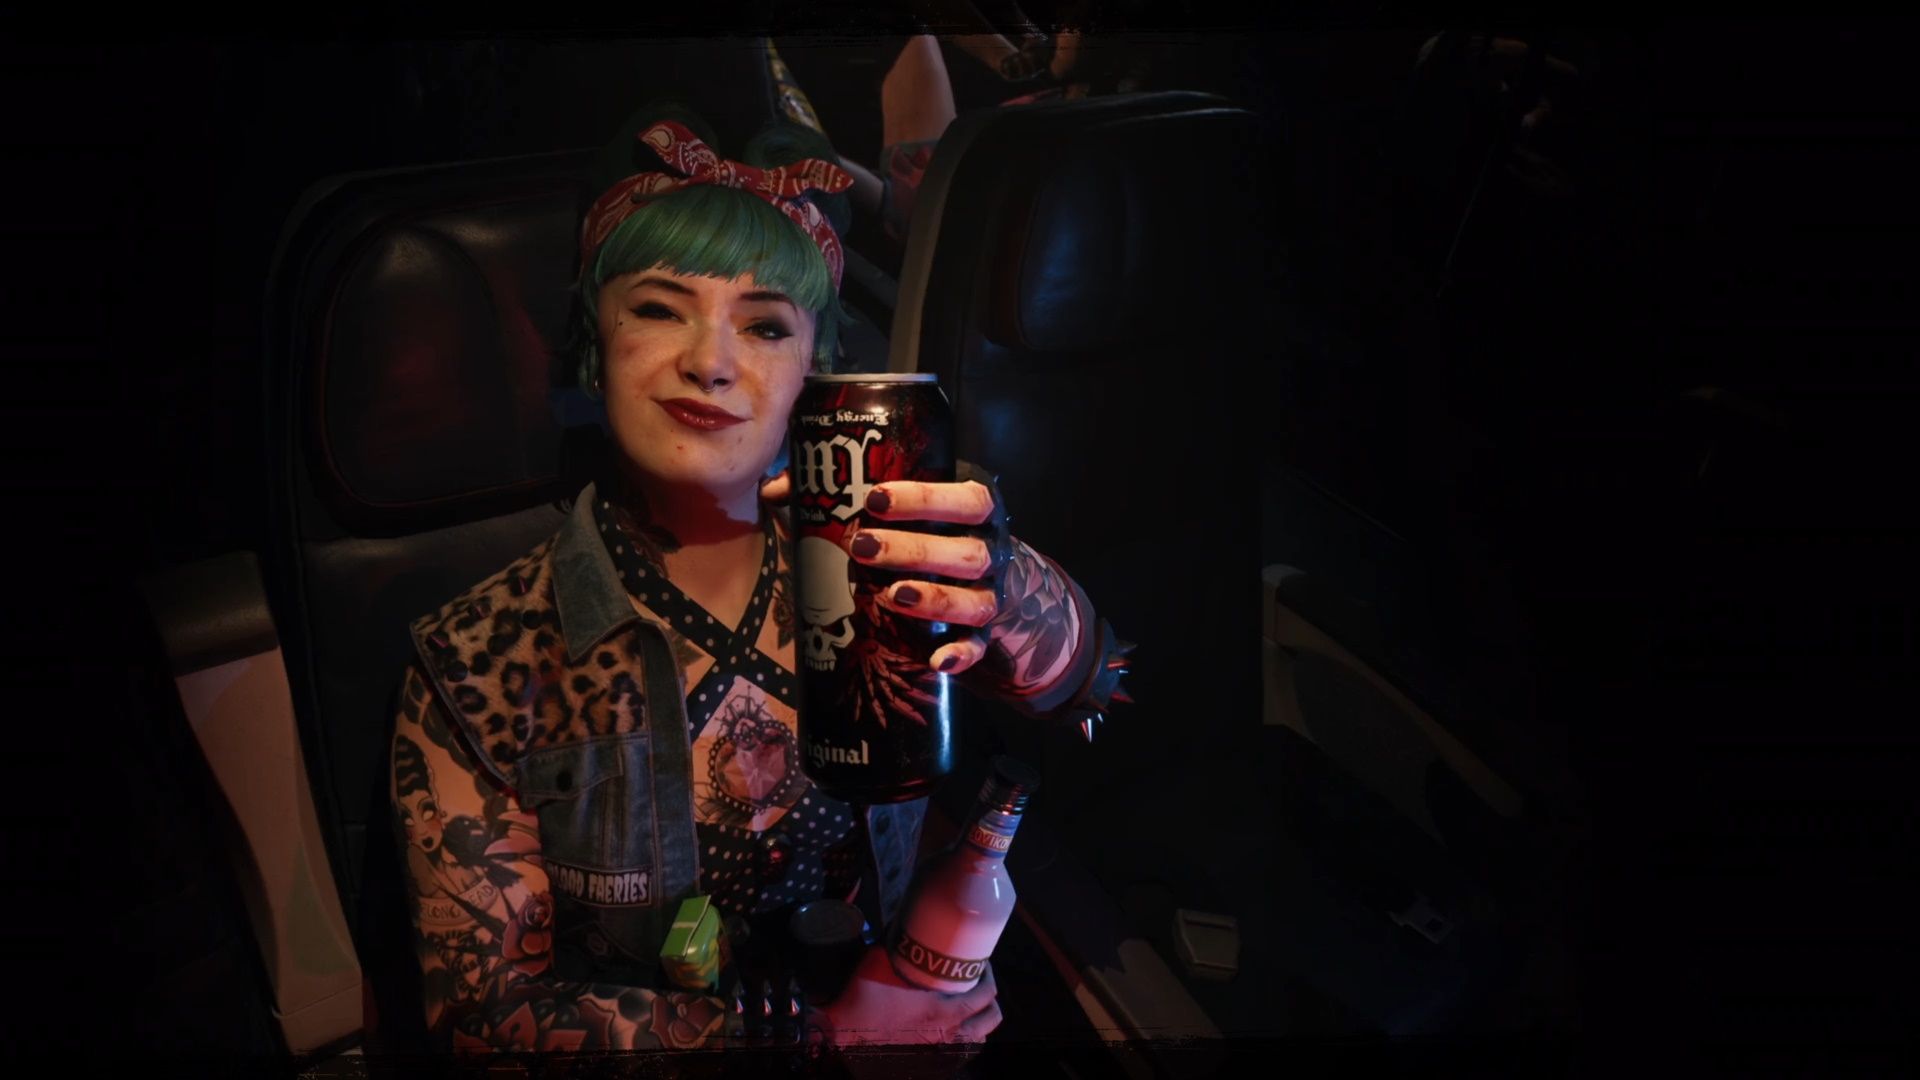 Dead Island 2, Dani toasting the camera with an energy drink